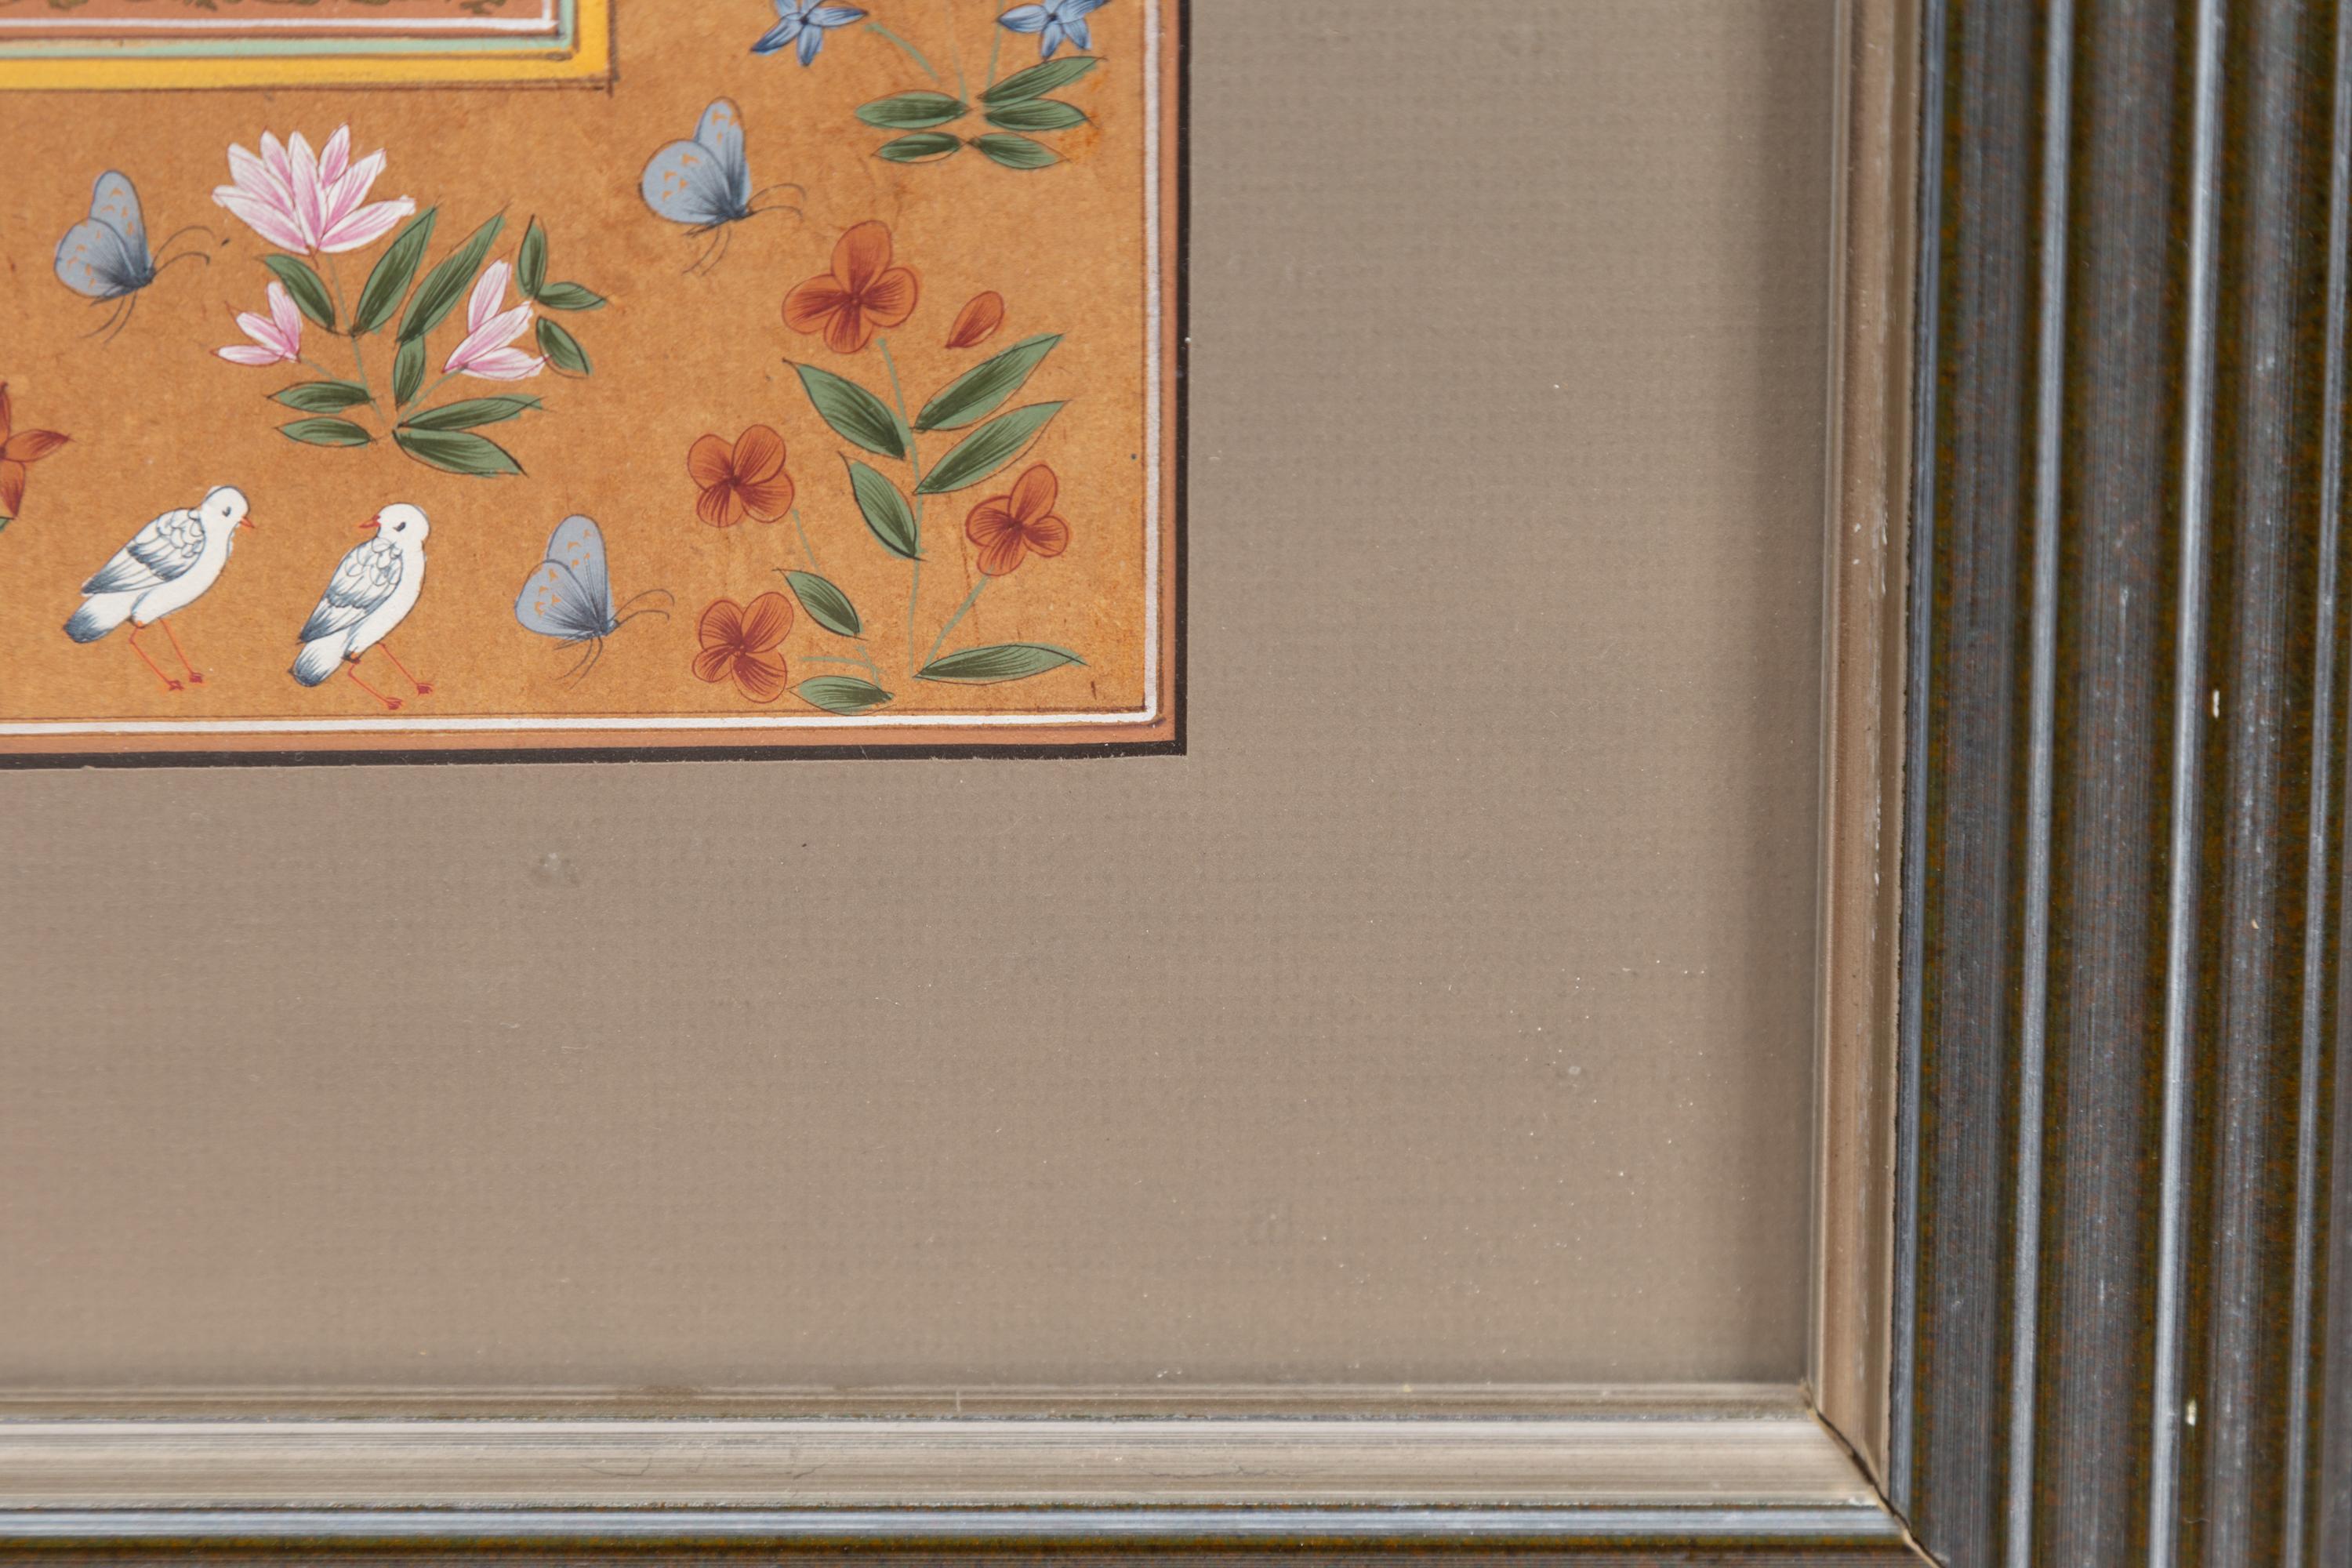 Indian Floral Still-Life from the Midcentury Period with Flowers and Birds 6